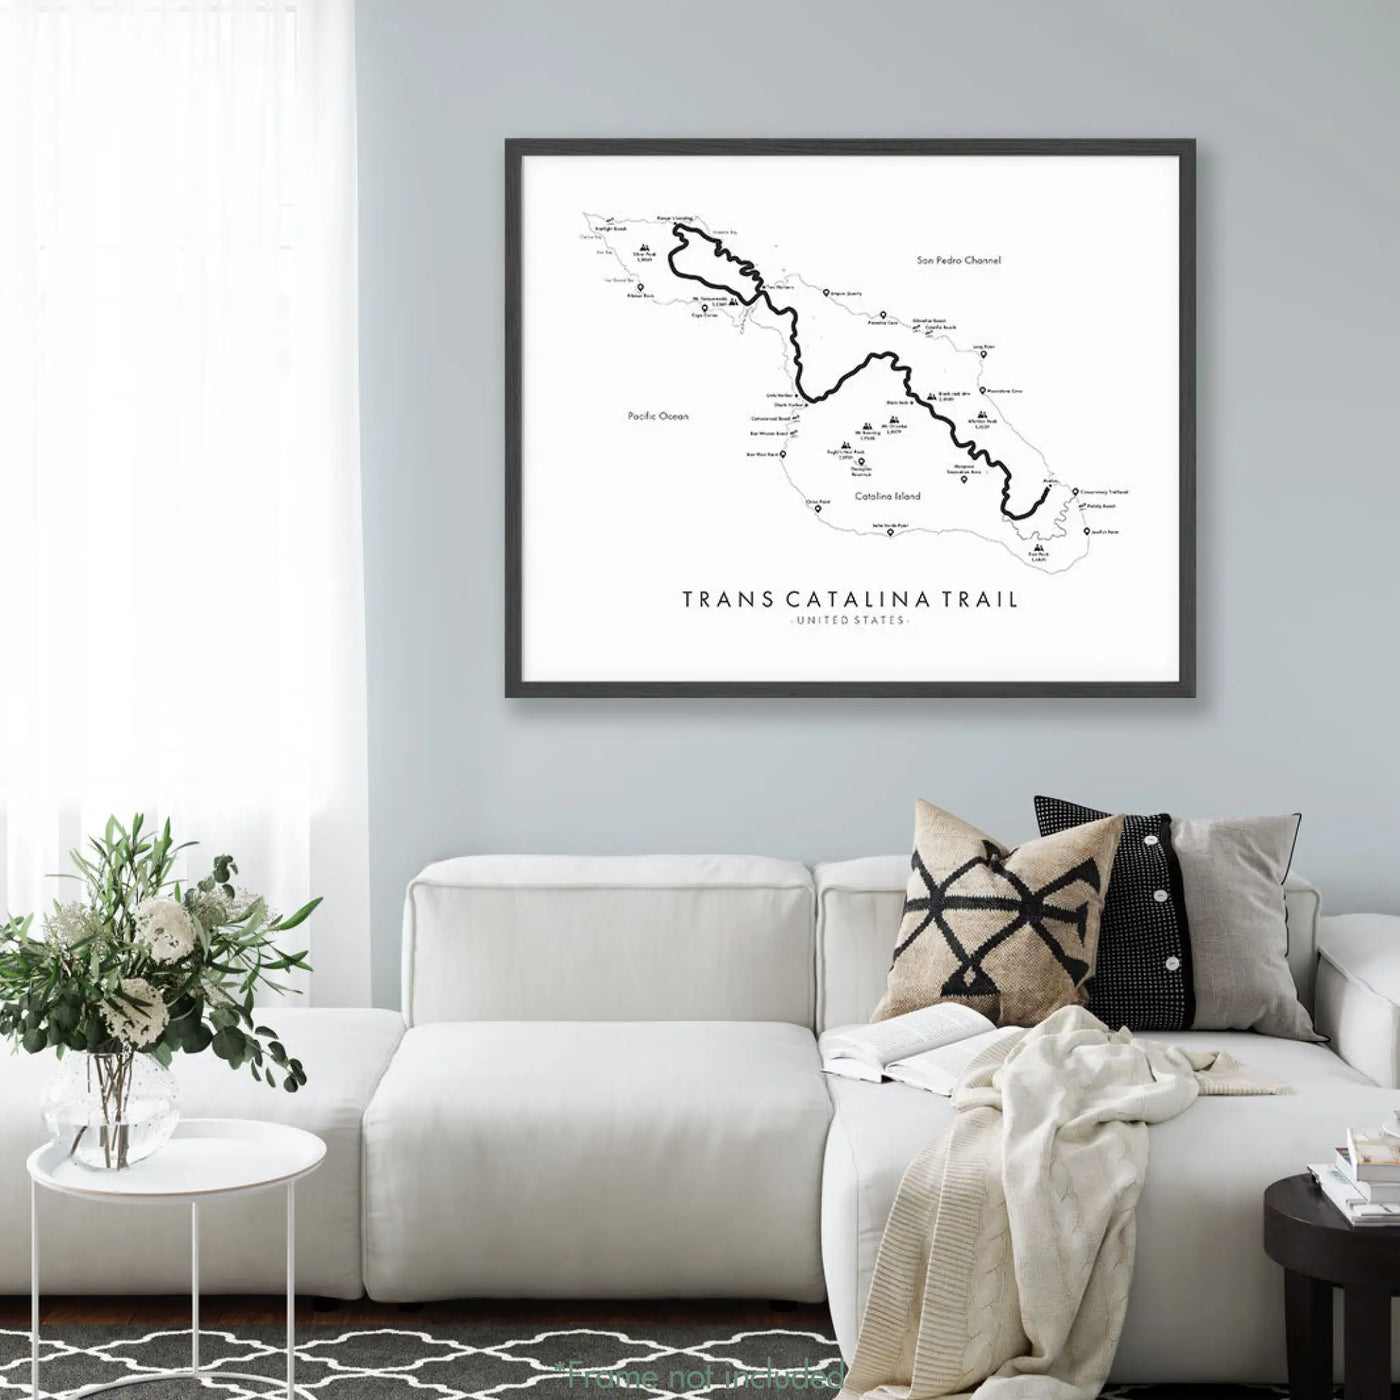 Trail Poster of Trans Catalina Trail - White Mockup